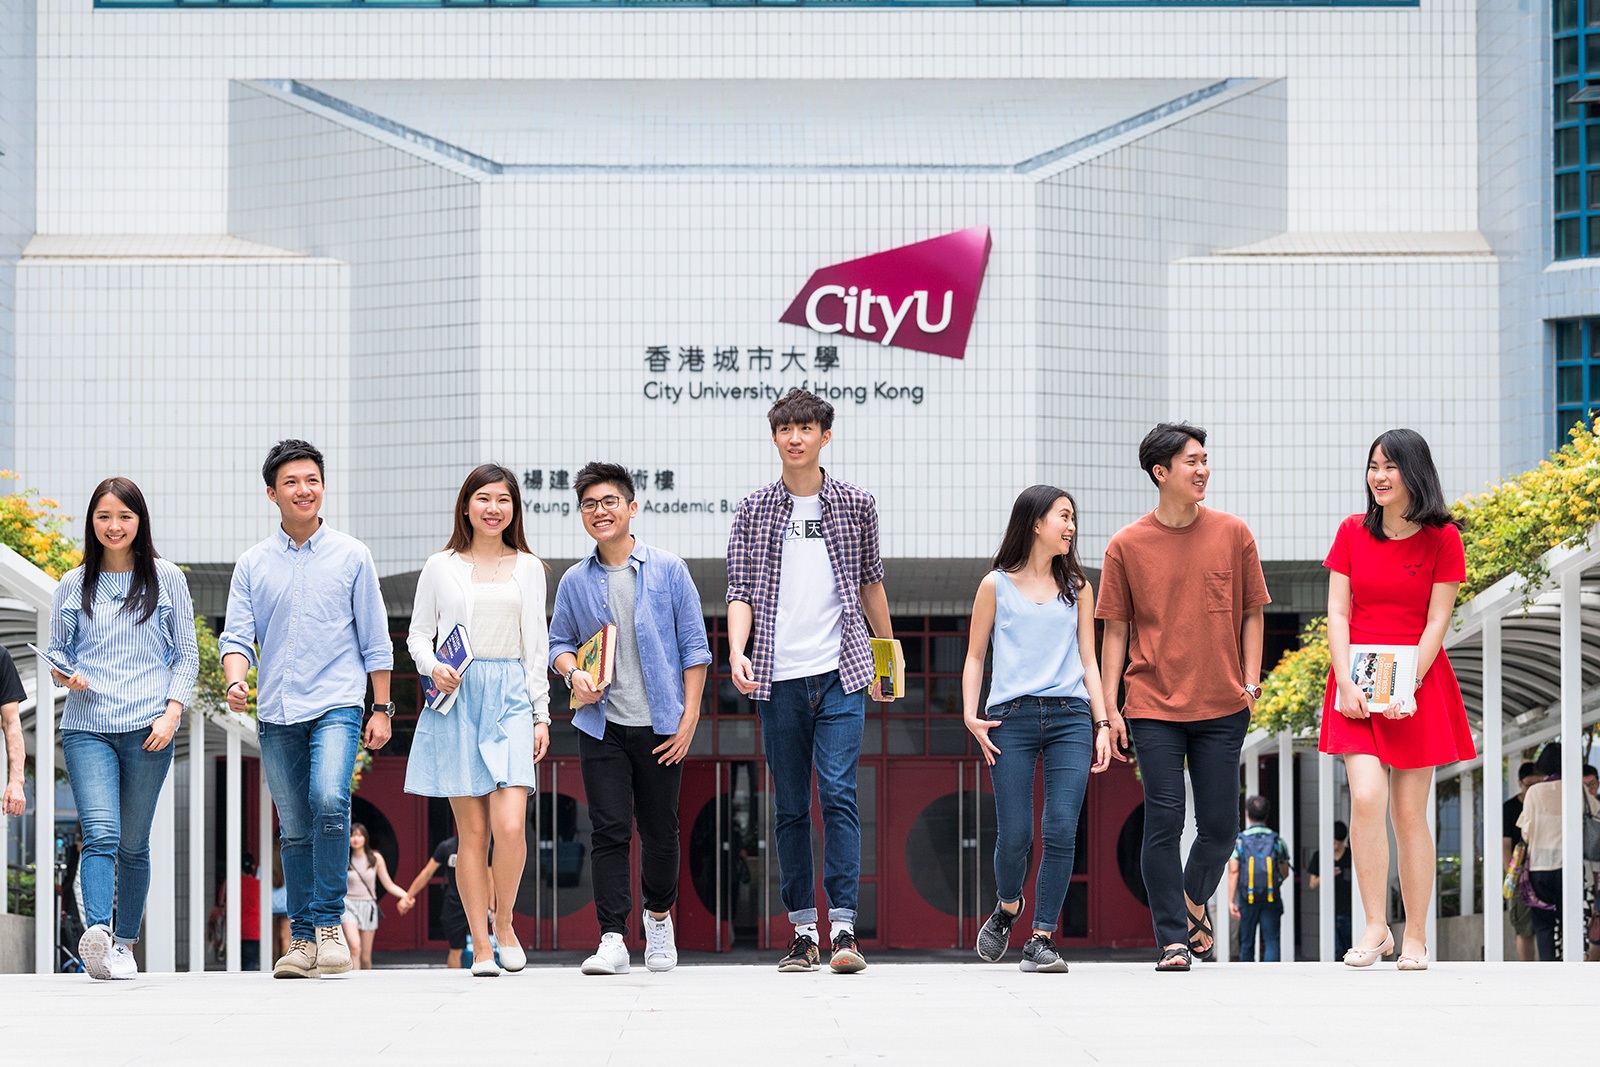 CityU welcomes visiting students